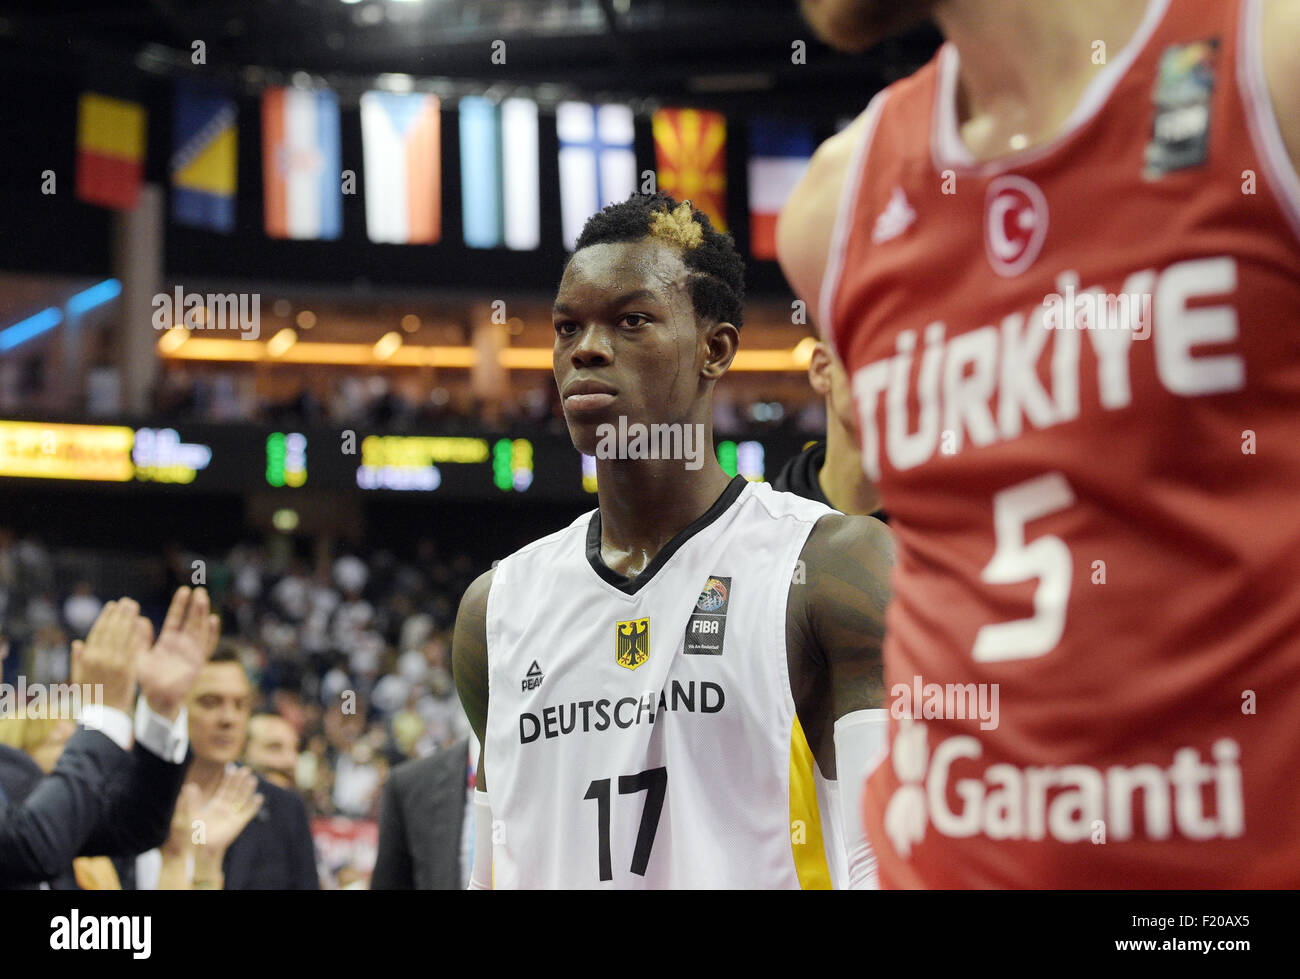 Berlin, Germany. 8th Sep, 2015. Germany's Dennis Schroeder reacts after the FIBA EuroBasket 2015 Group B match Germany vs Turkey in Berlin, Germany, 8 September 2015. Germany lost 75:80. Photo: Rainer Jensen/dpa/Alamy Live News Stock Photo